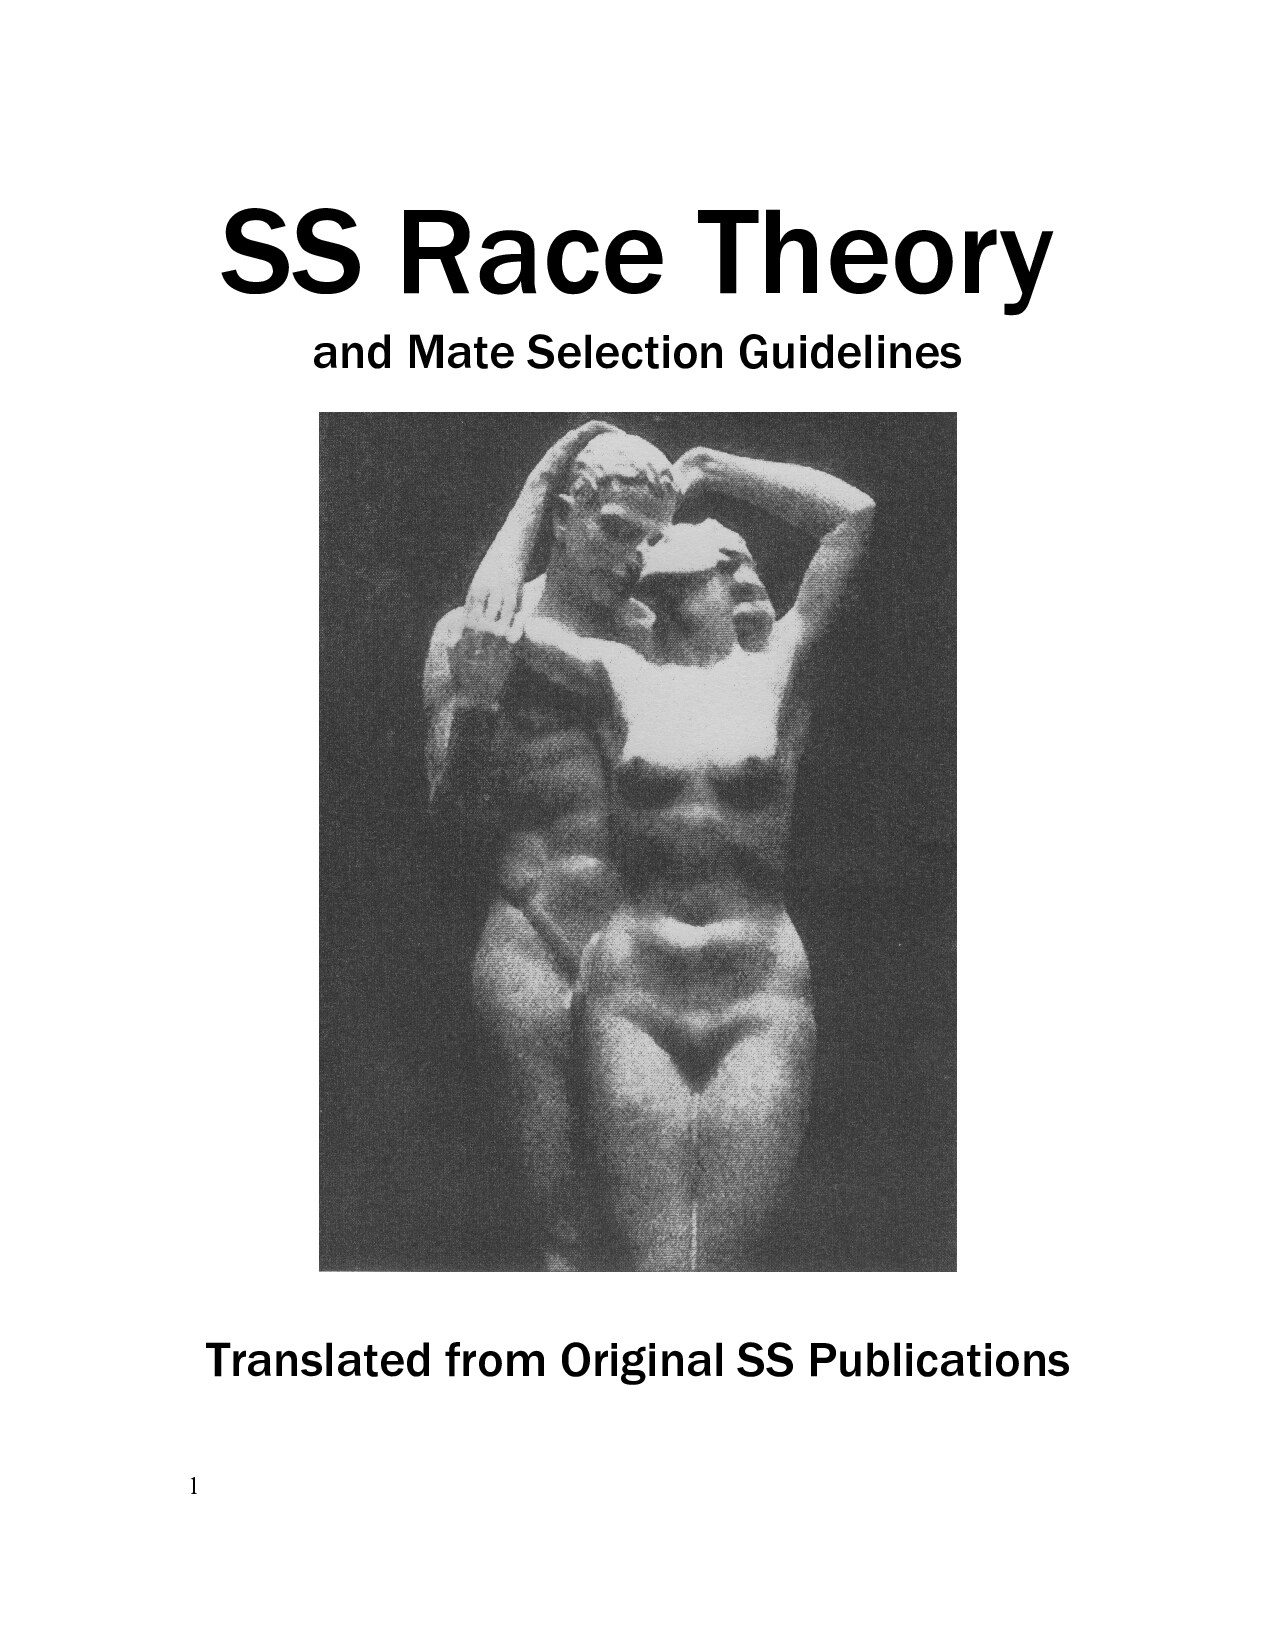 SS Race Theory and Mate Selection Guidelines